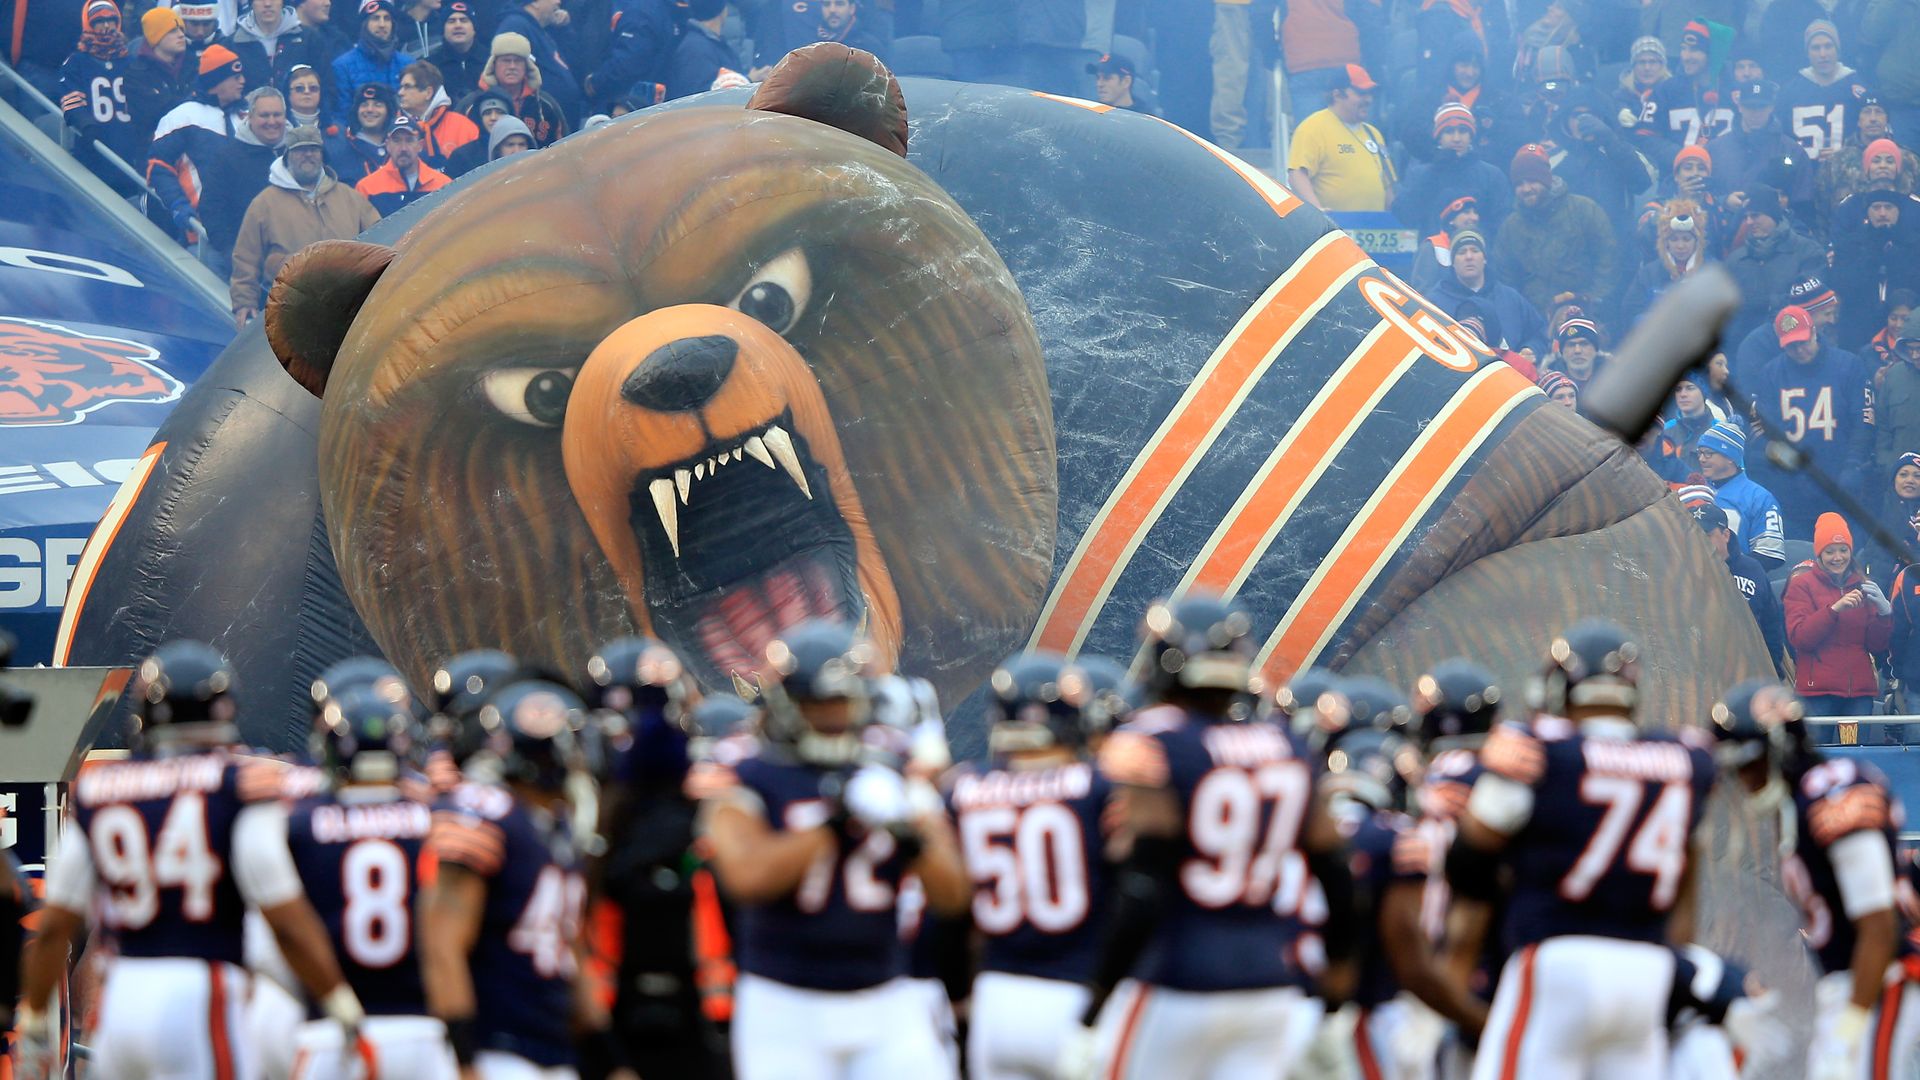 chicago bears with giant inflatable bear